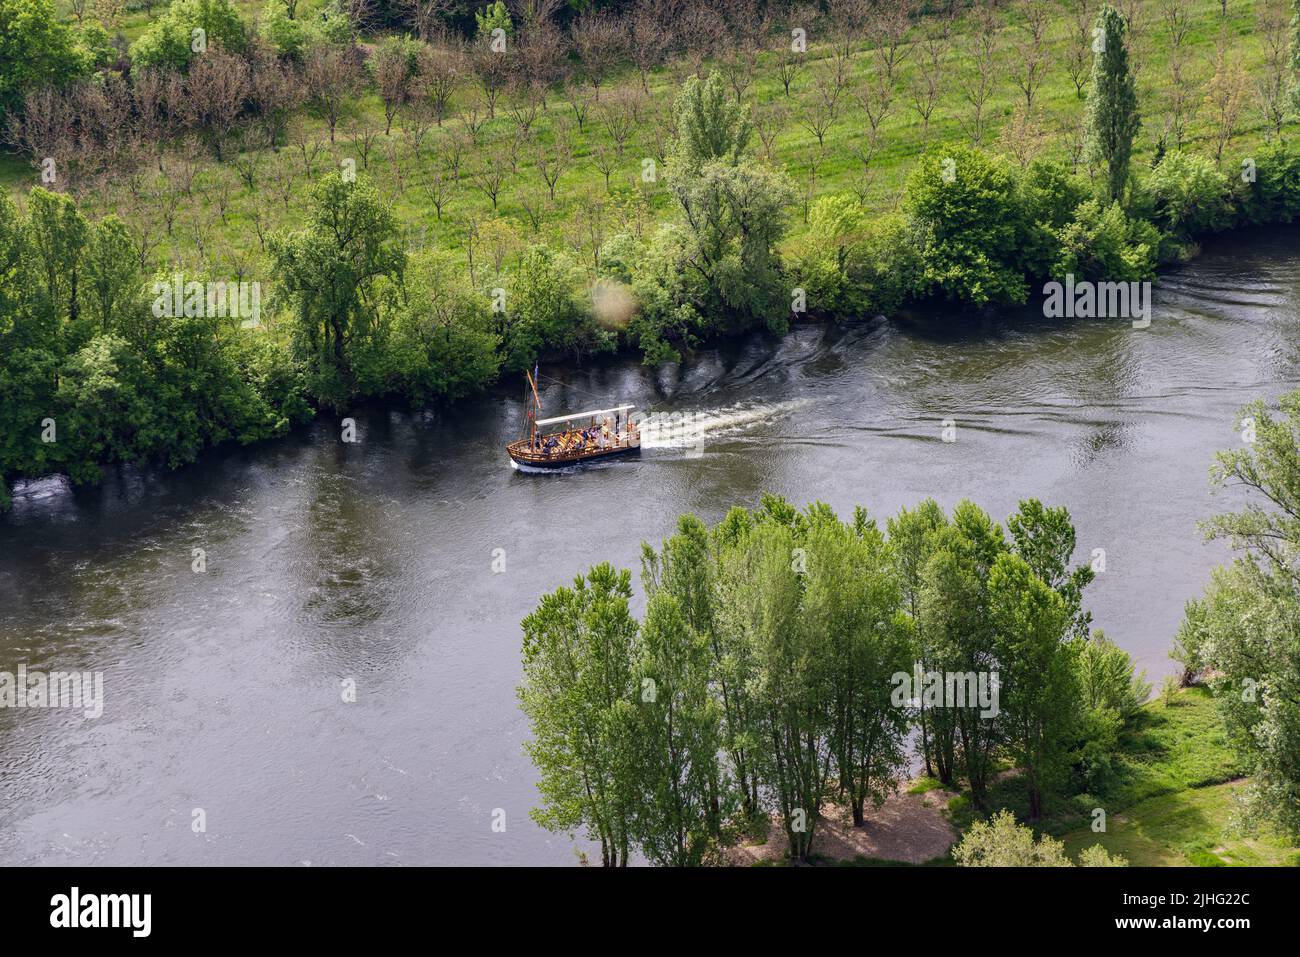 Vezac, Dorforgne, France - May 2, 2022: Awerial view on The Gabares traditional flat-bottomed boats along the river Dordogne in France Stock Photo